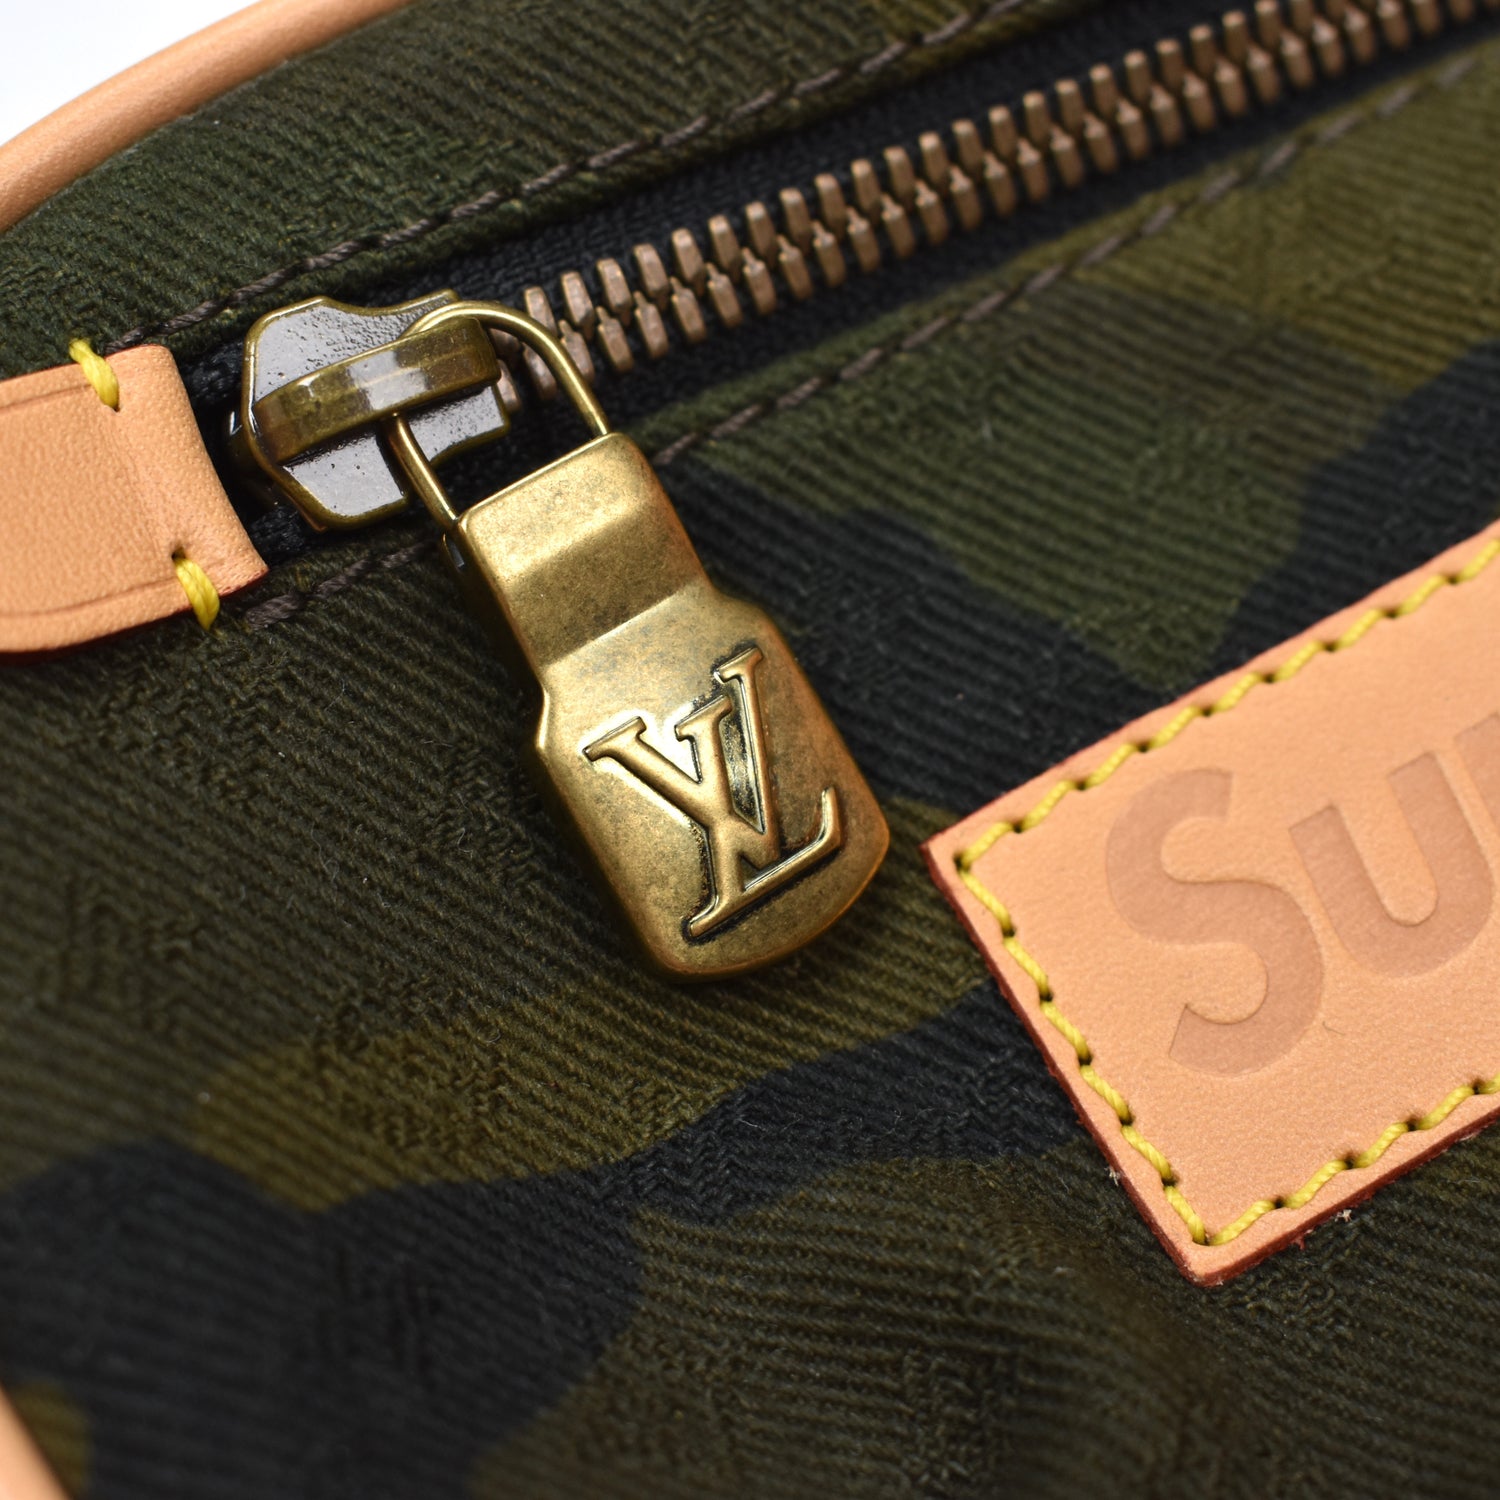 Louis Vuitton Bum Bag Limited Edition Supreme Camouflage Canvas at 1stDibs